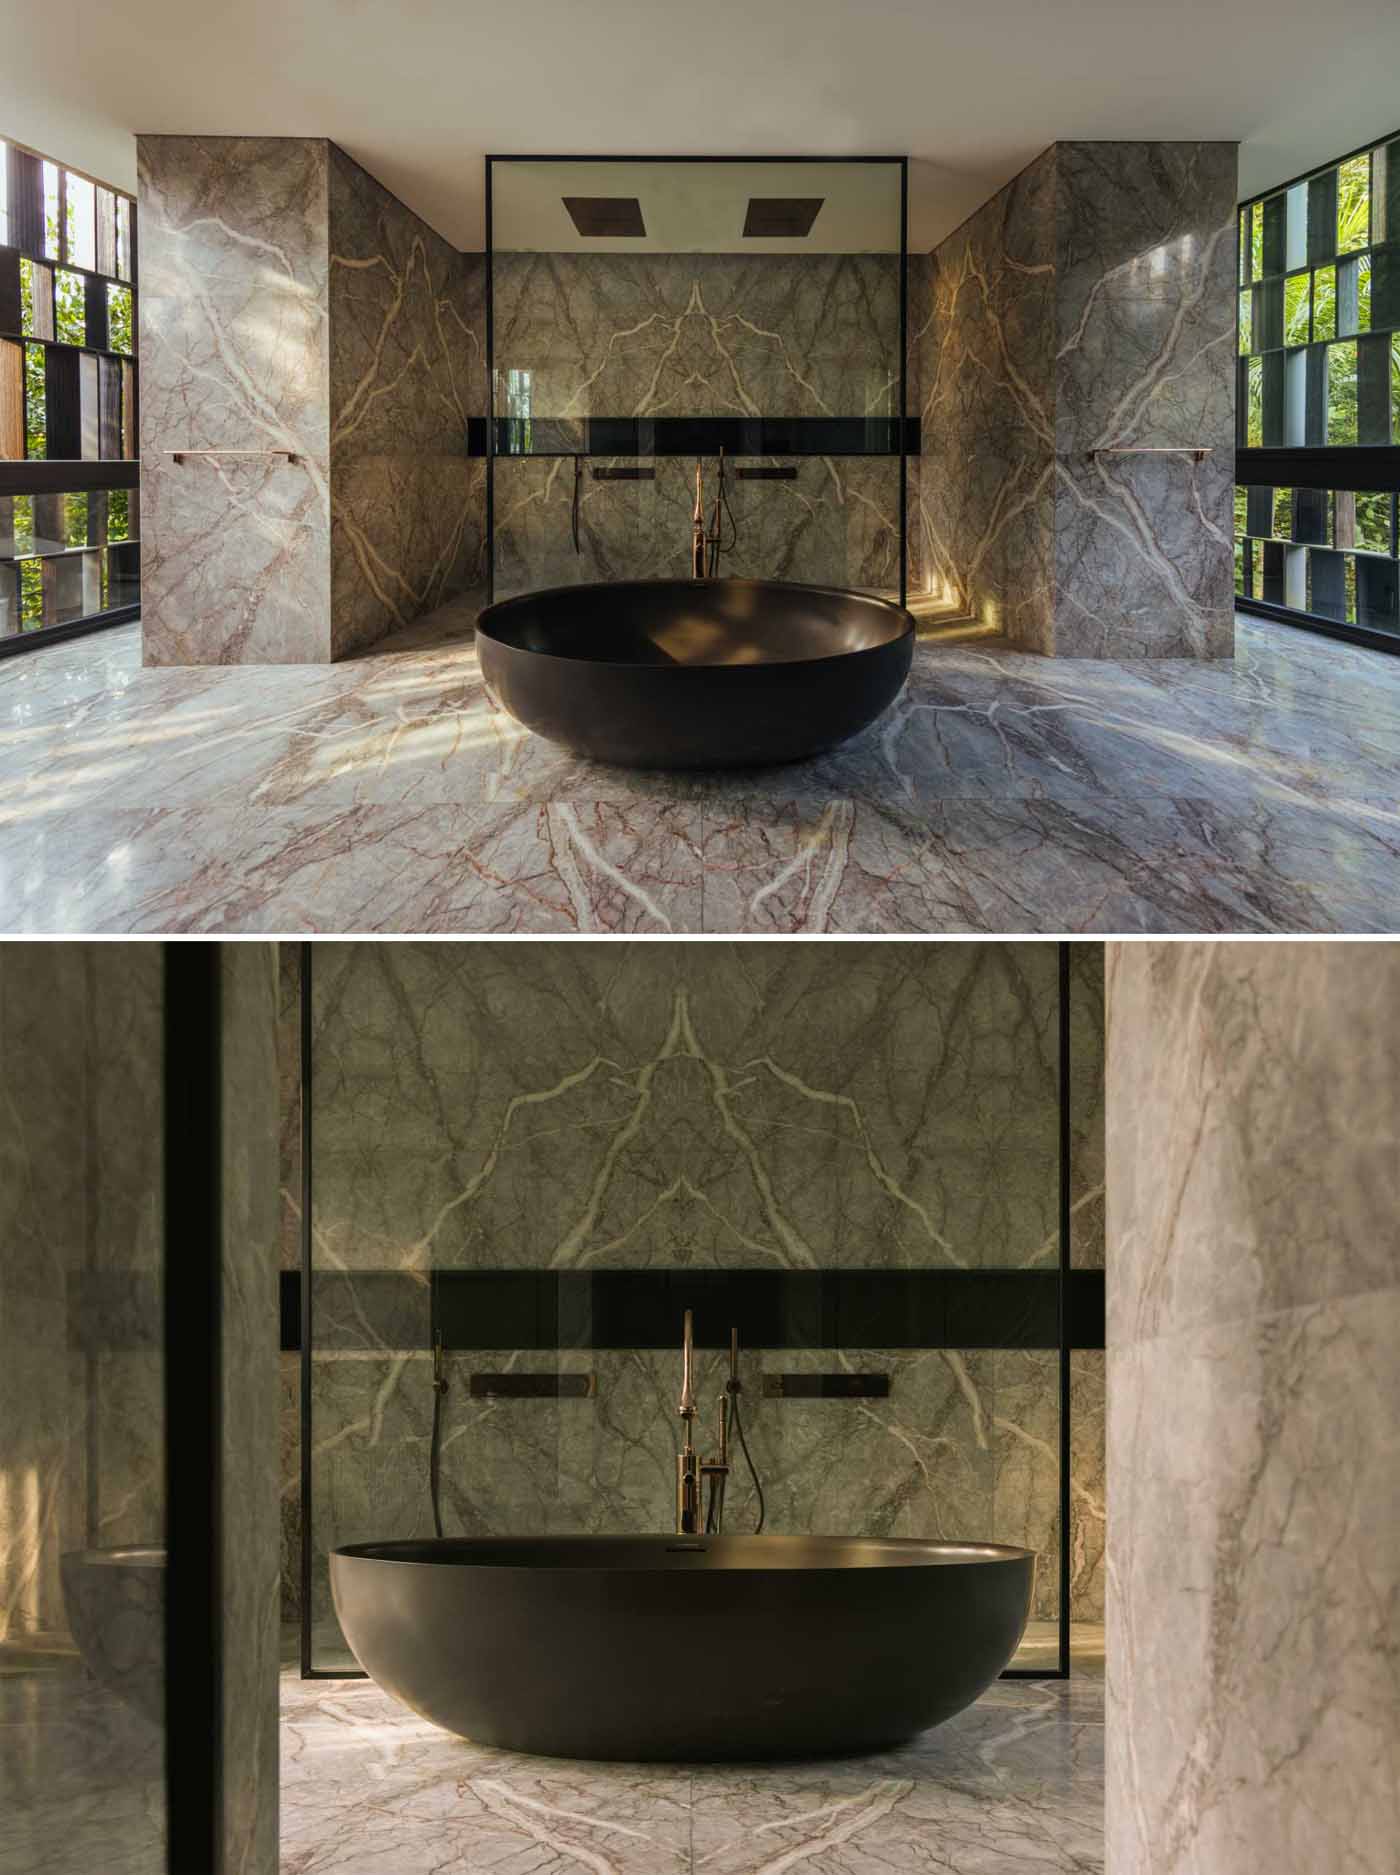 A modern bathroom with a black freestanding bathtub and a walk-in double s،wer.